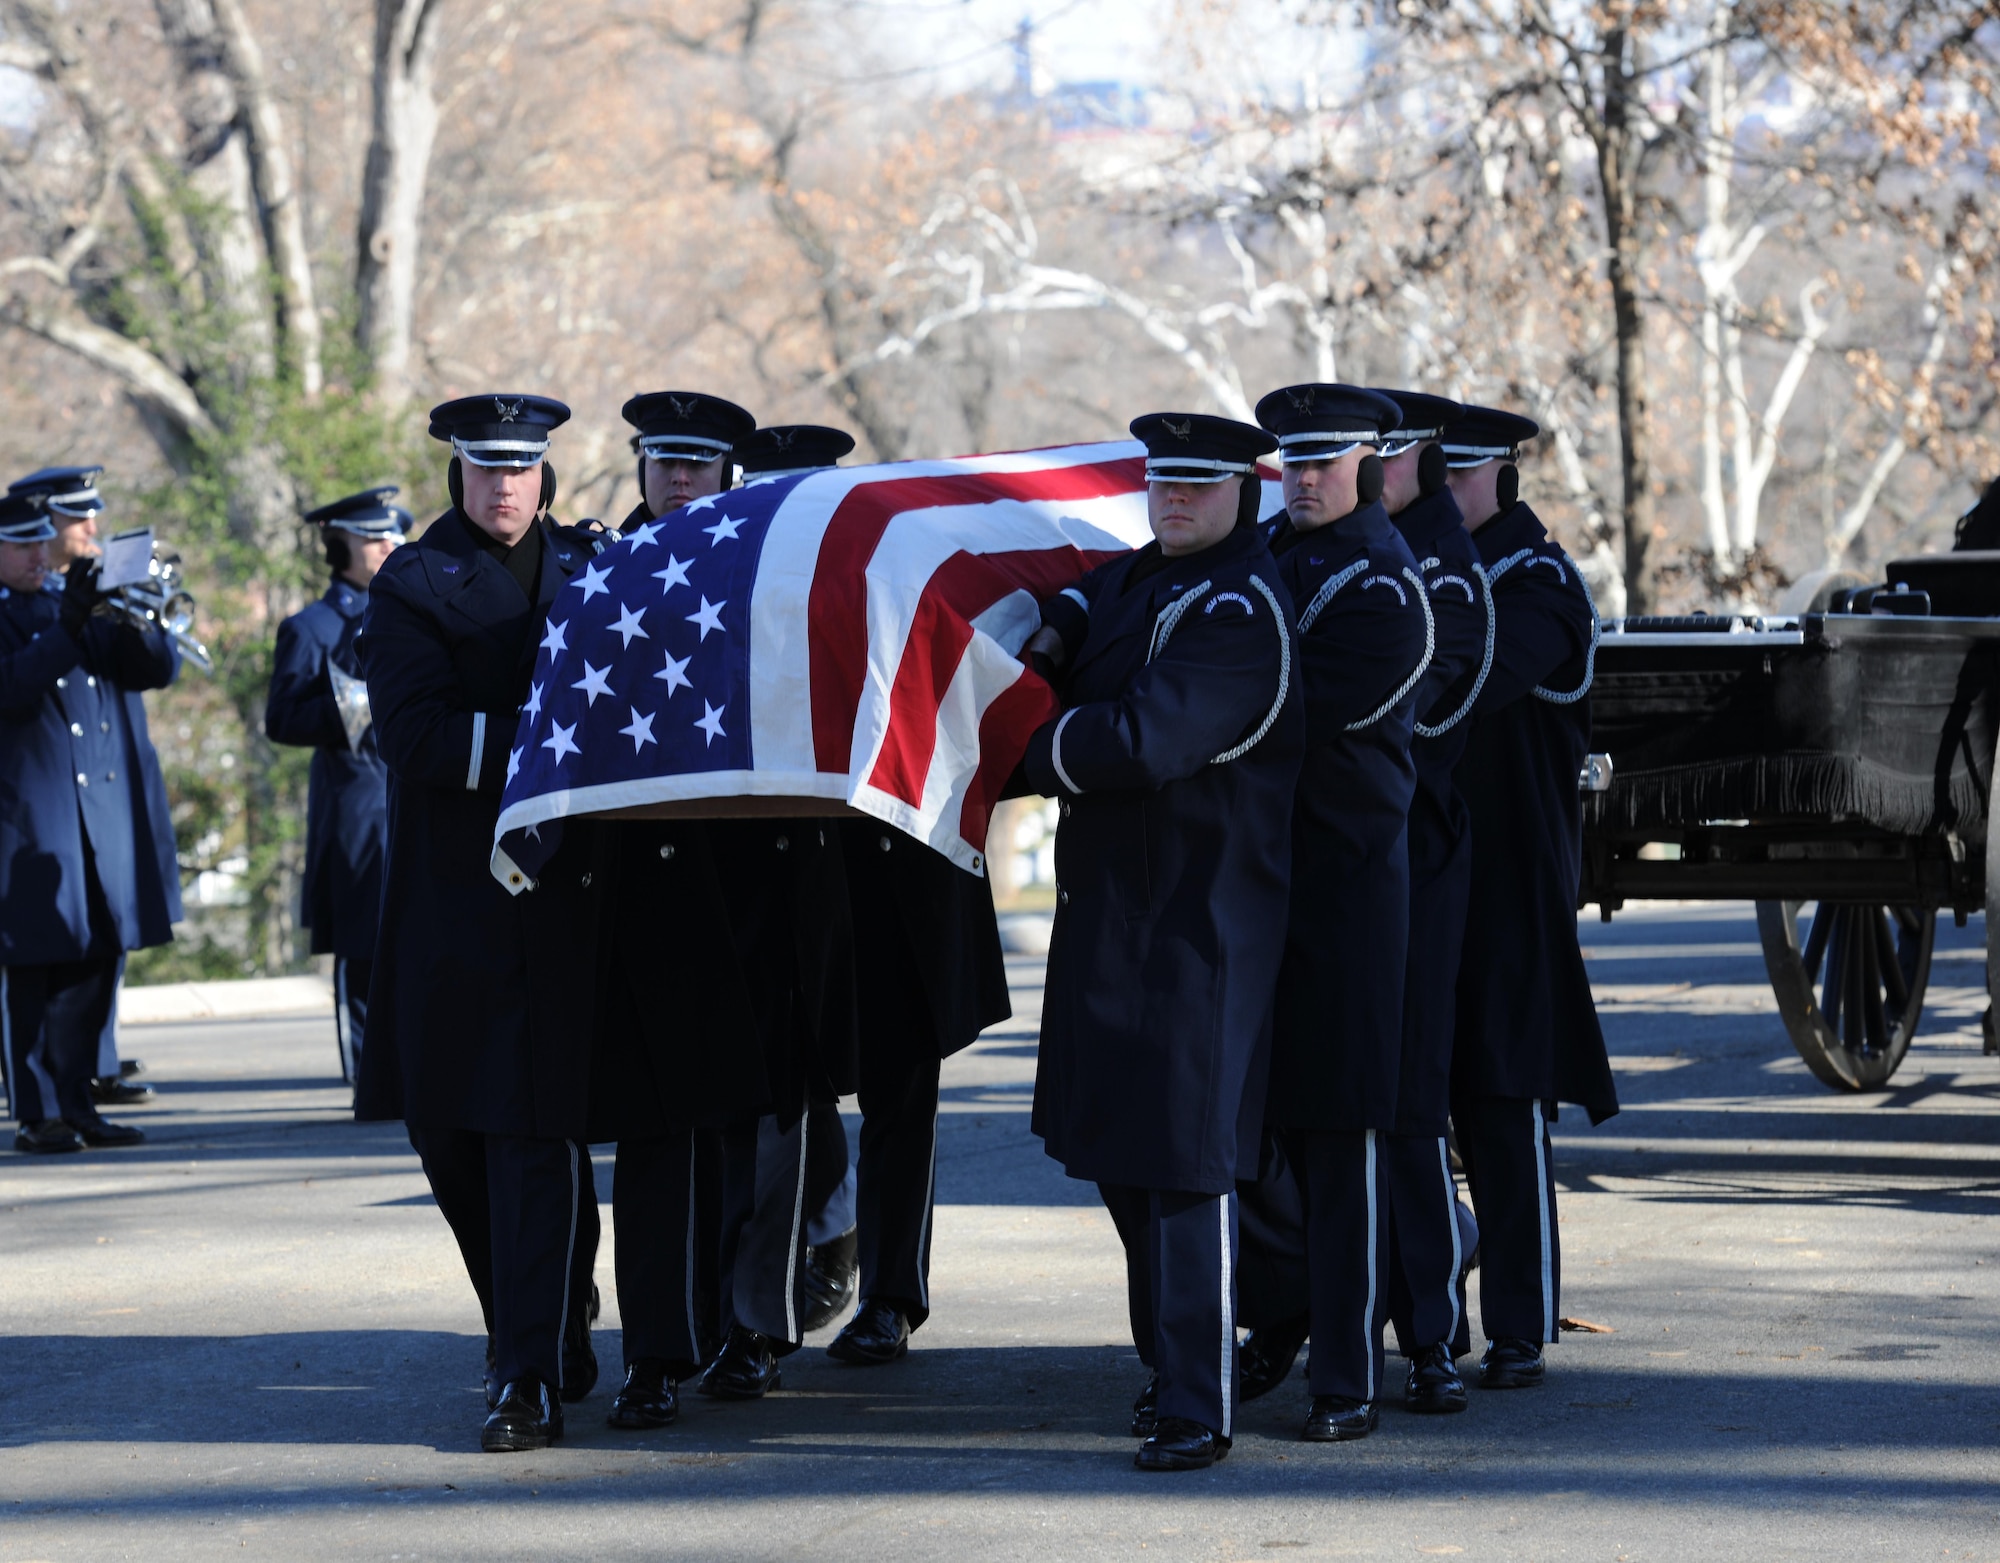 U.S. Air Force Honor guardsmen carry Col. Francis J. McGouldrick Jr.’s casket to his final resting place Dec. 13, 2013, at Arlington National Cemetery, Va. McGouldrick was missing in action since 1968 when his plane collided with another plane. His remains were found in a remote jungle in Laos. (U.S. Air Force photo/Airman 1st Class Nesha Humes)